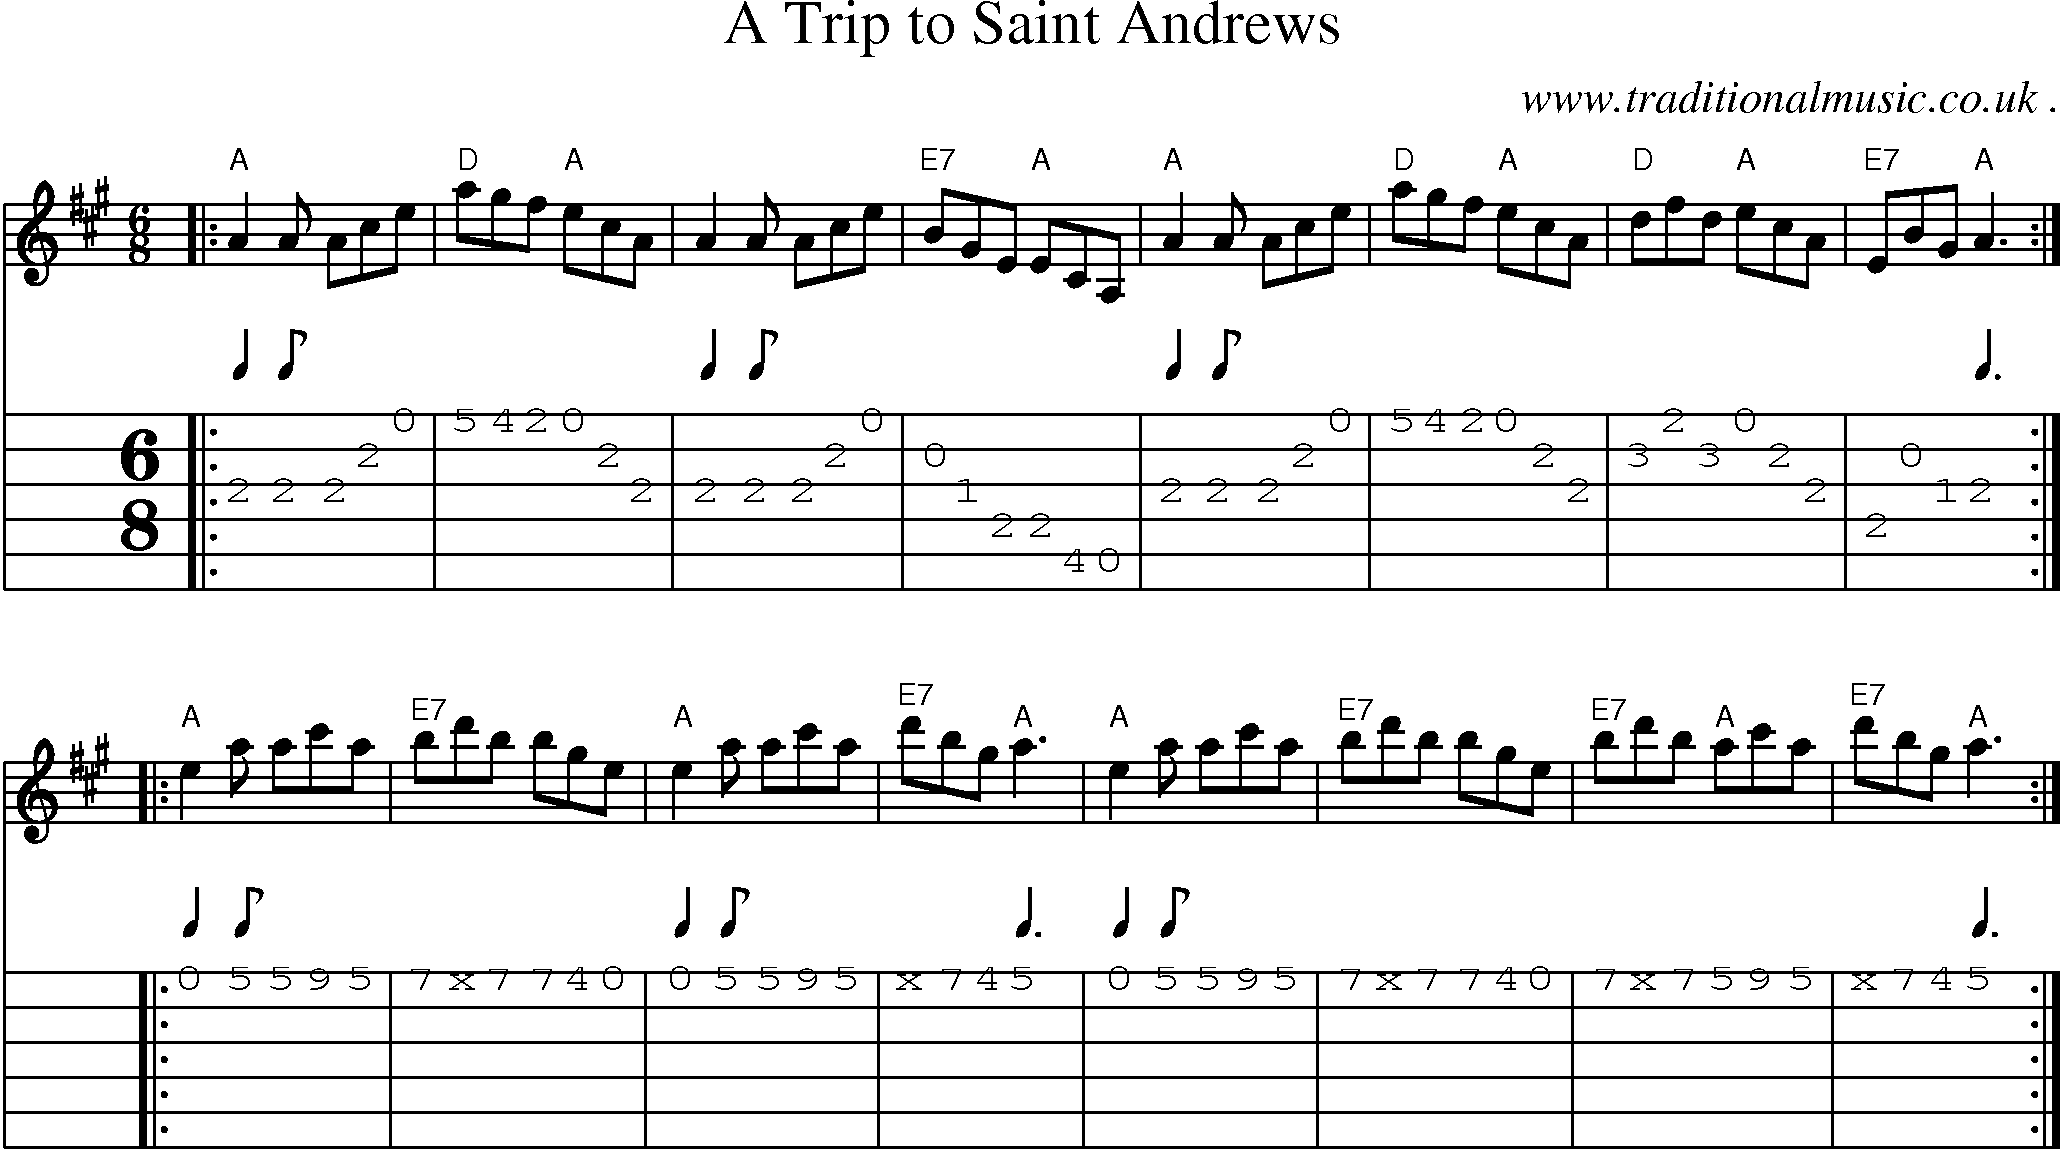 Sheet-music  score, Chords and Guitar Tabs for A Trip To Saint Andrews